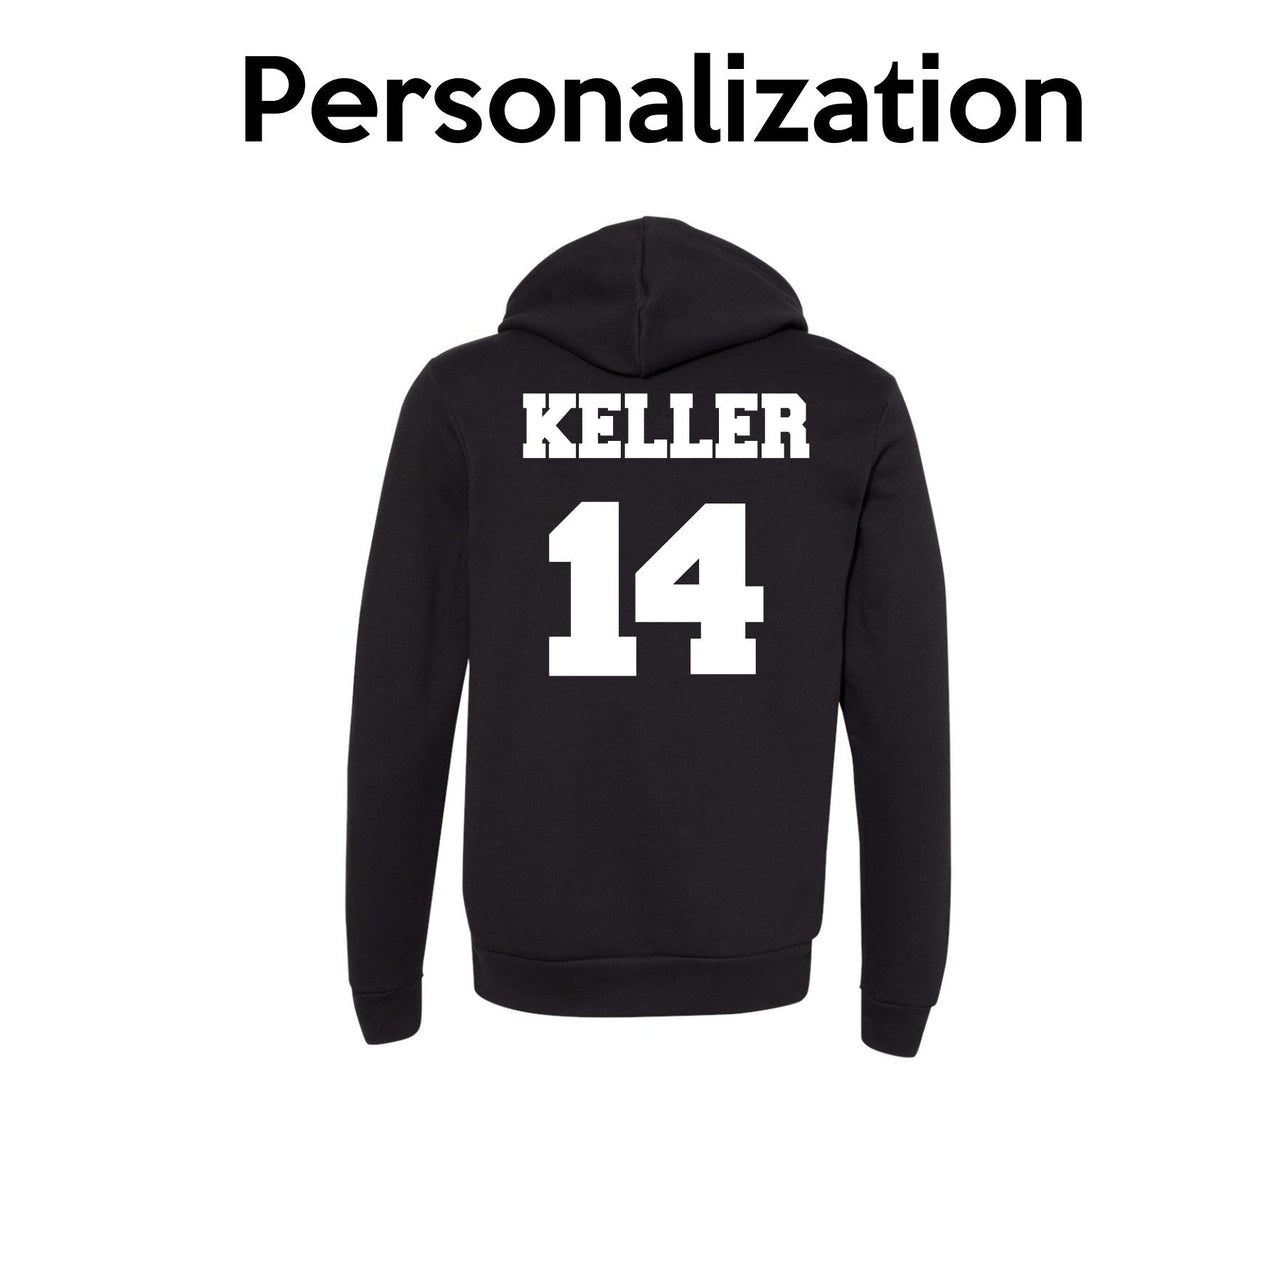 Add on - Name &/or Number Personalization